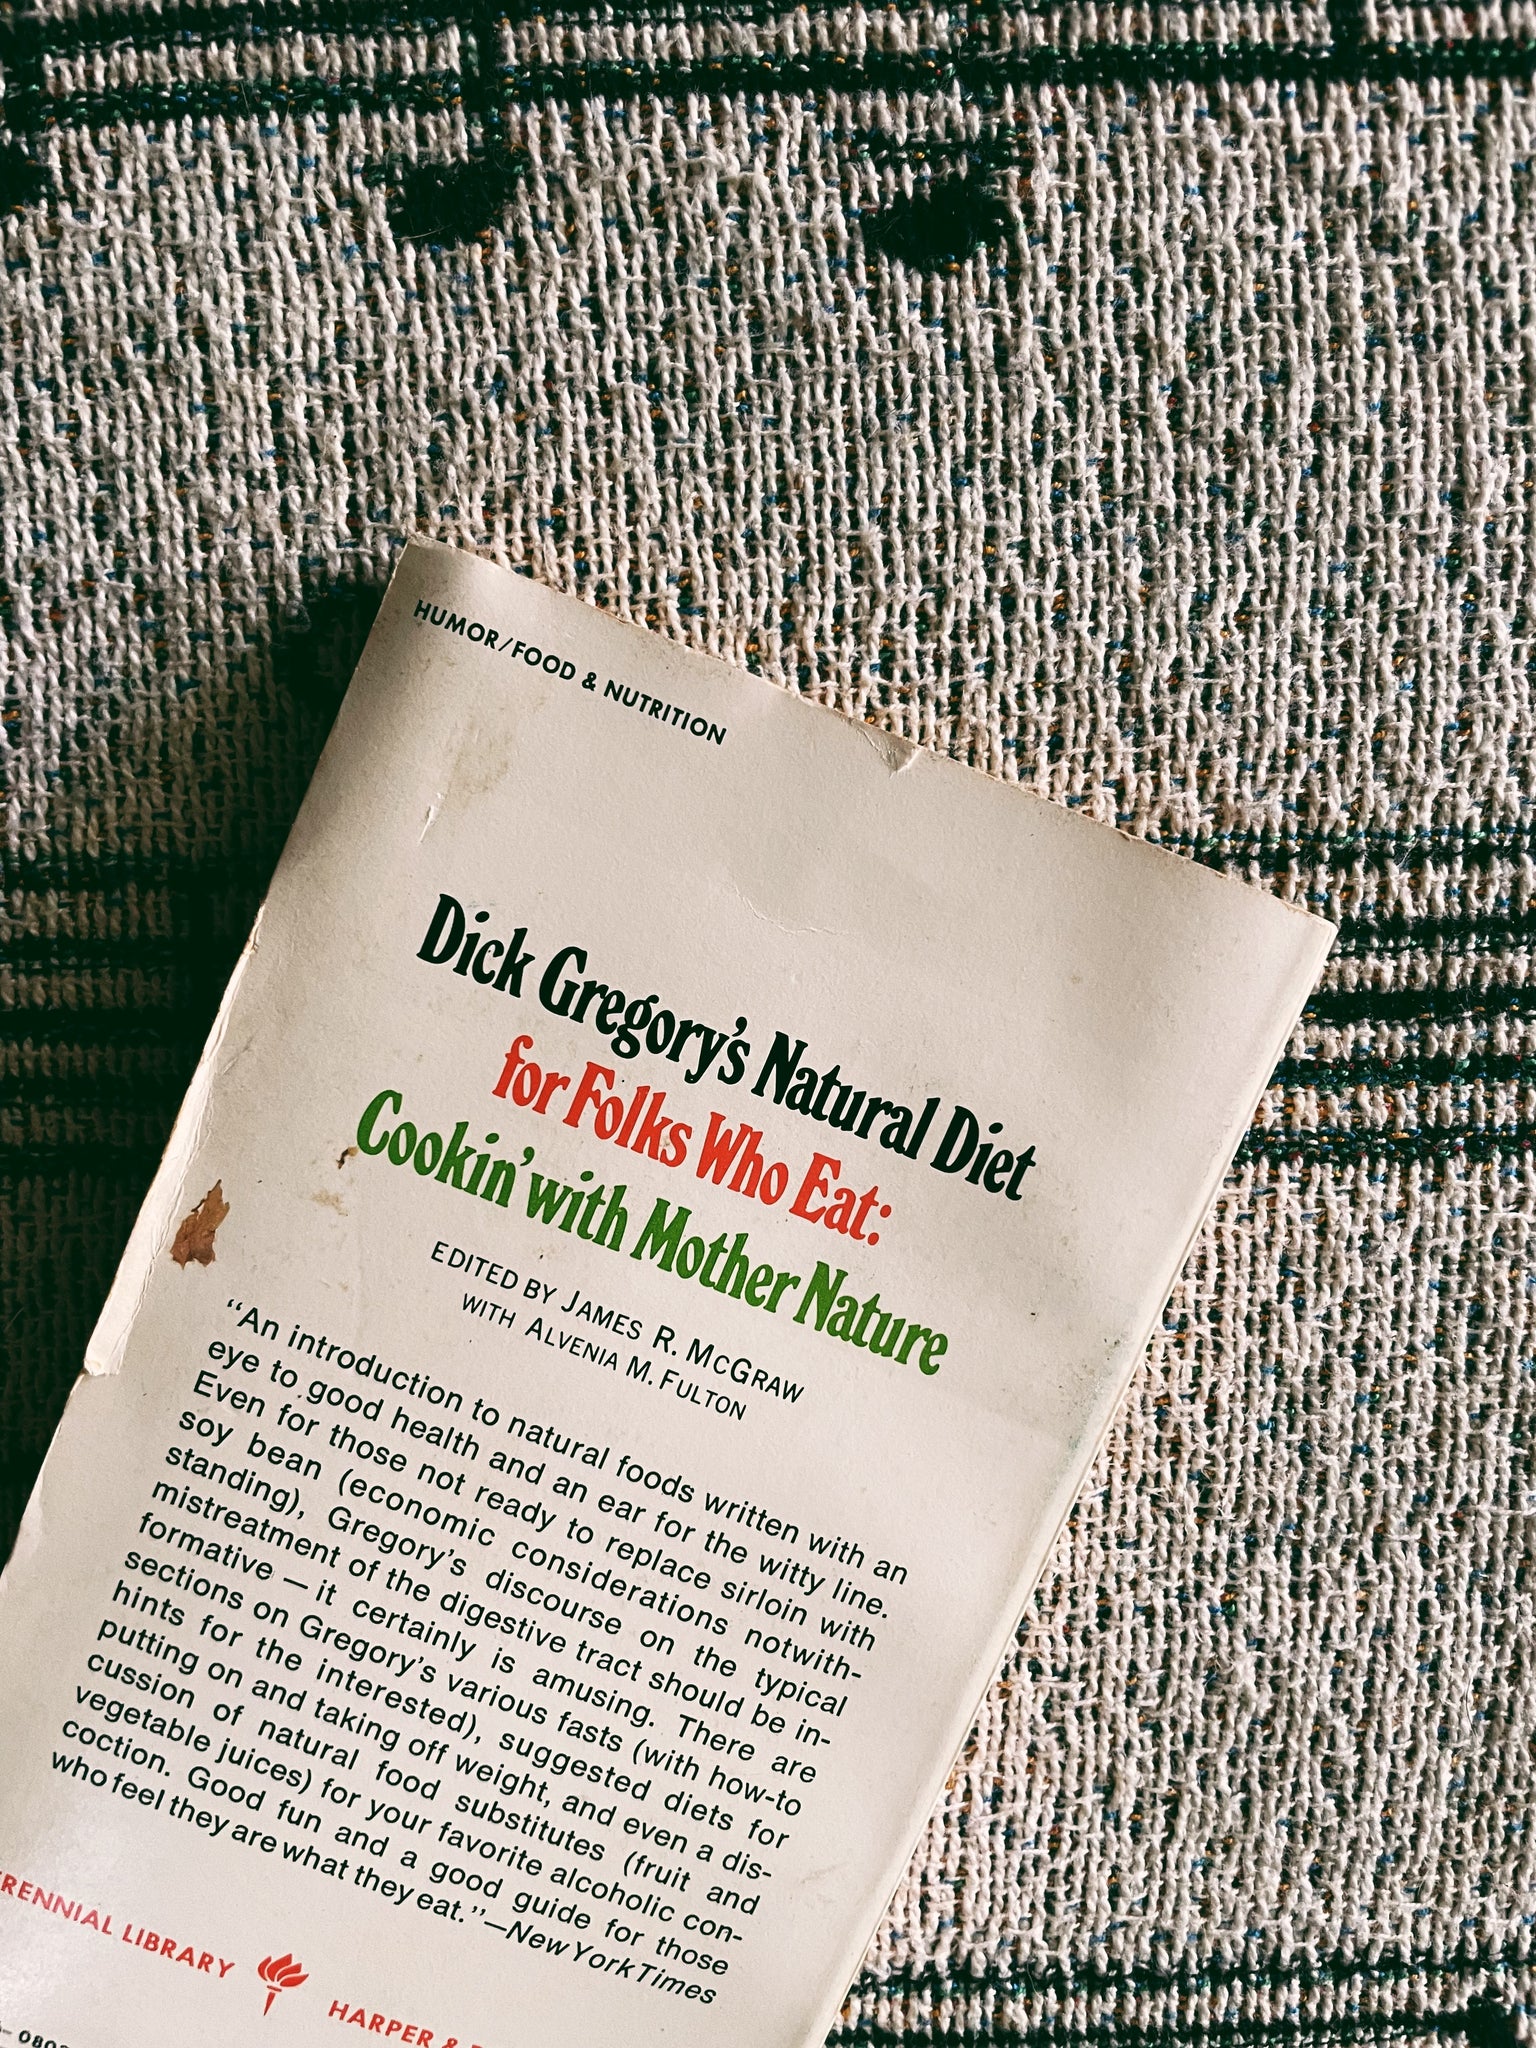 Vintage "Dick Gregory's Natural Cookbook for Folks Who Eat: Cookin' W/ Mother Nature" (First Edition, 1974)